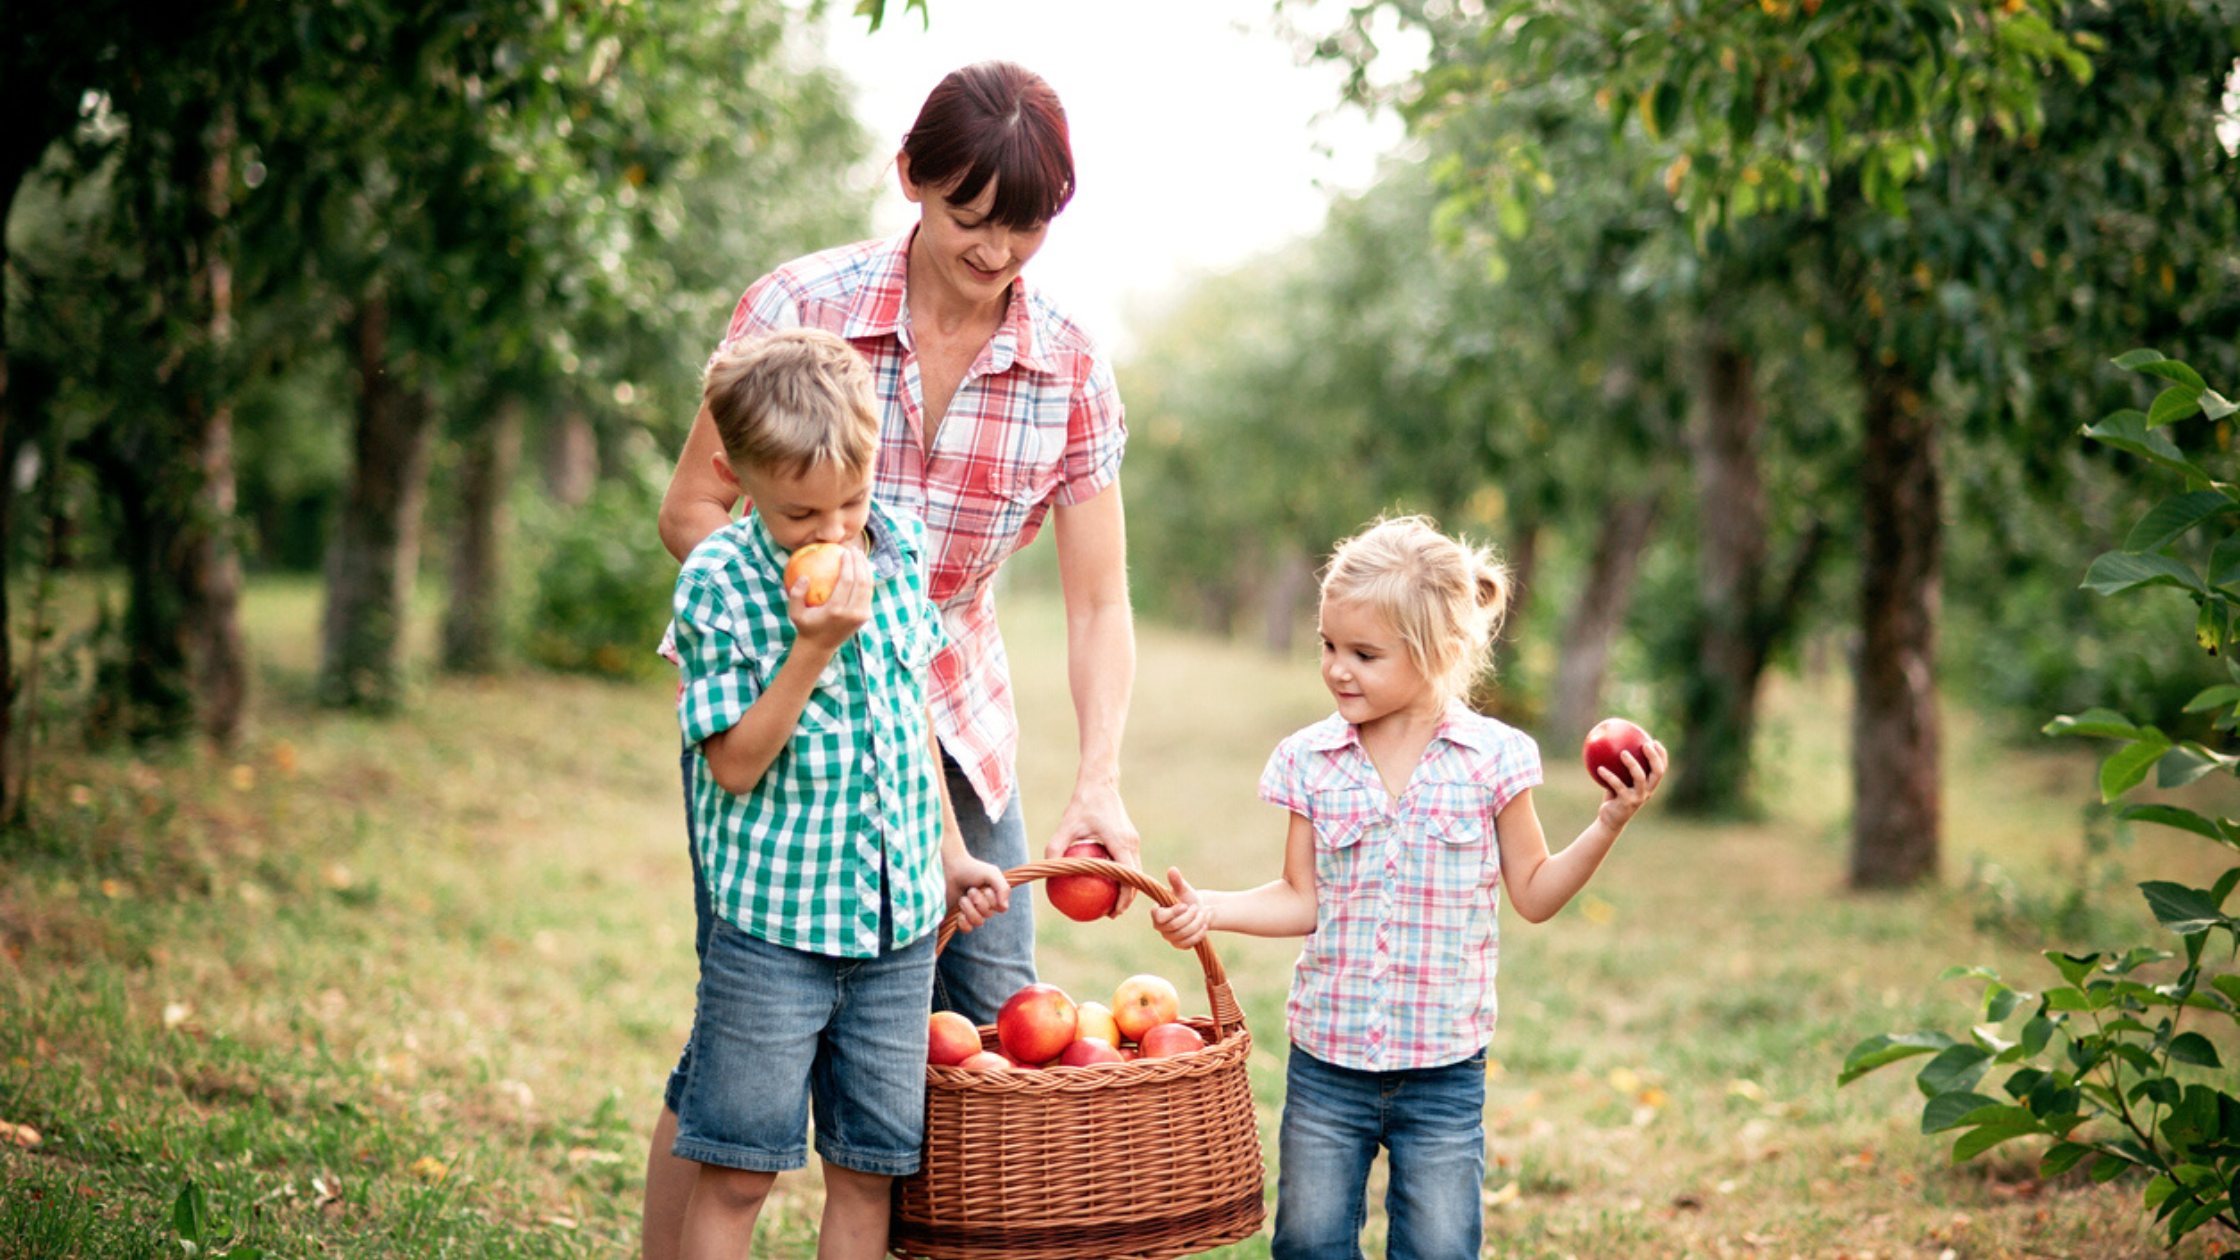 A family apple picking for one of their fall family activities.